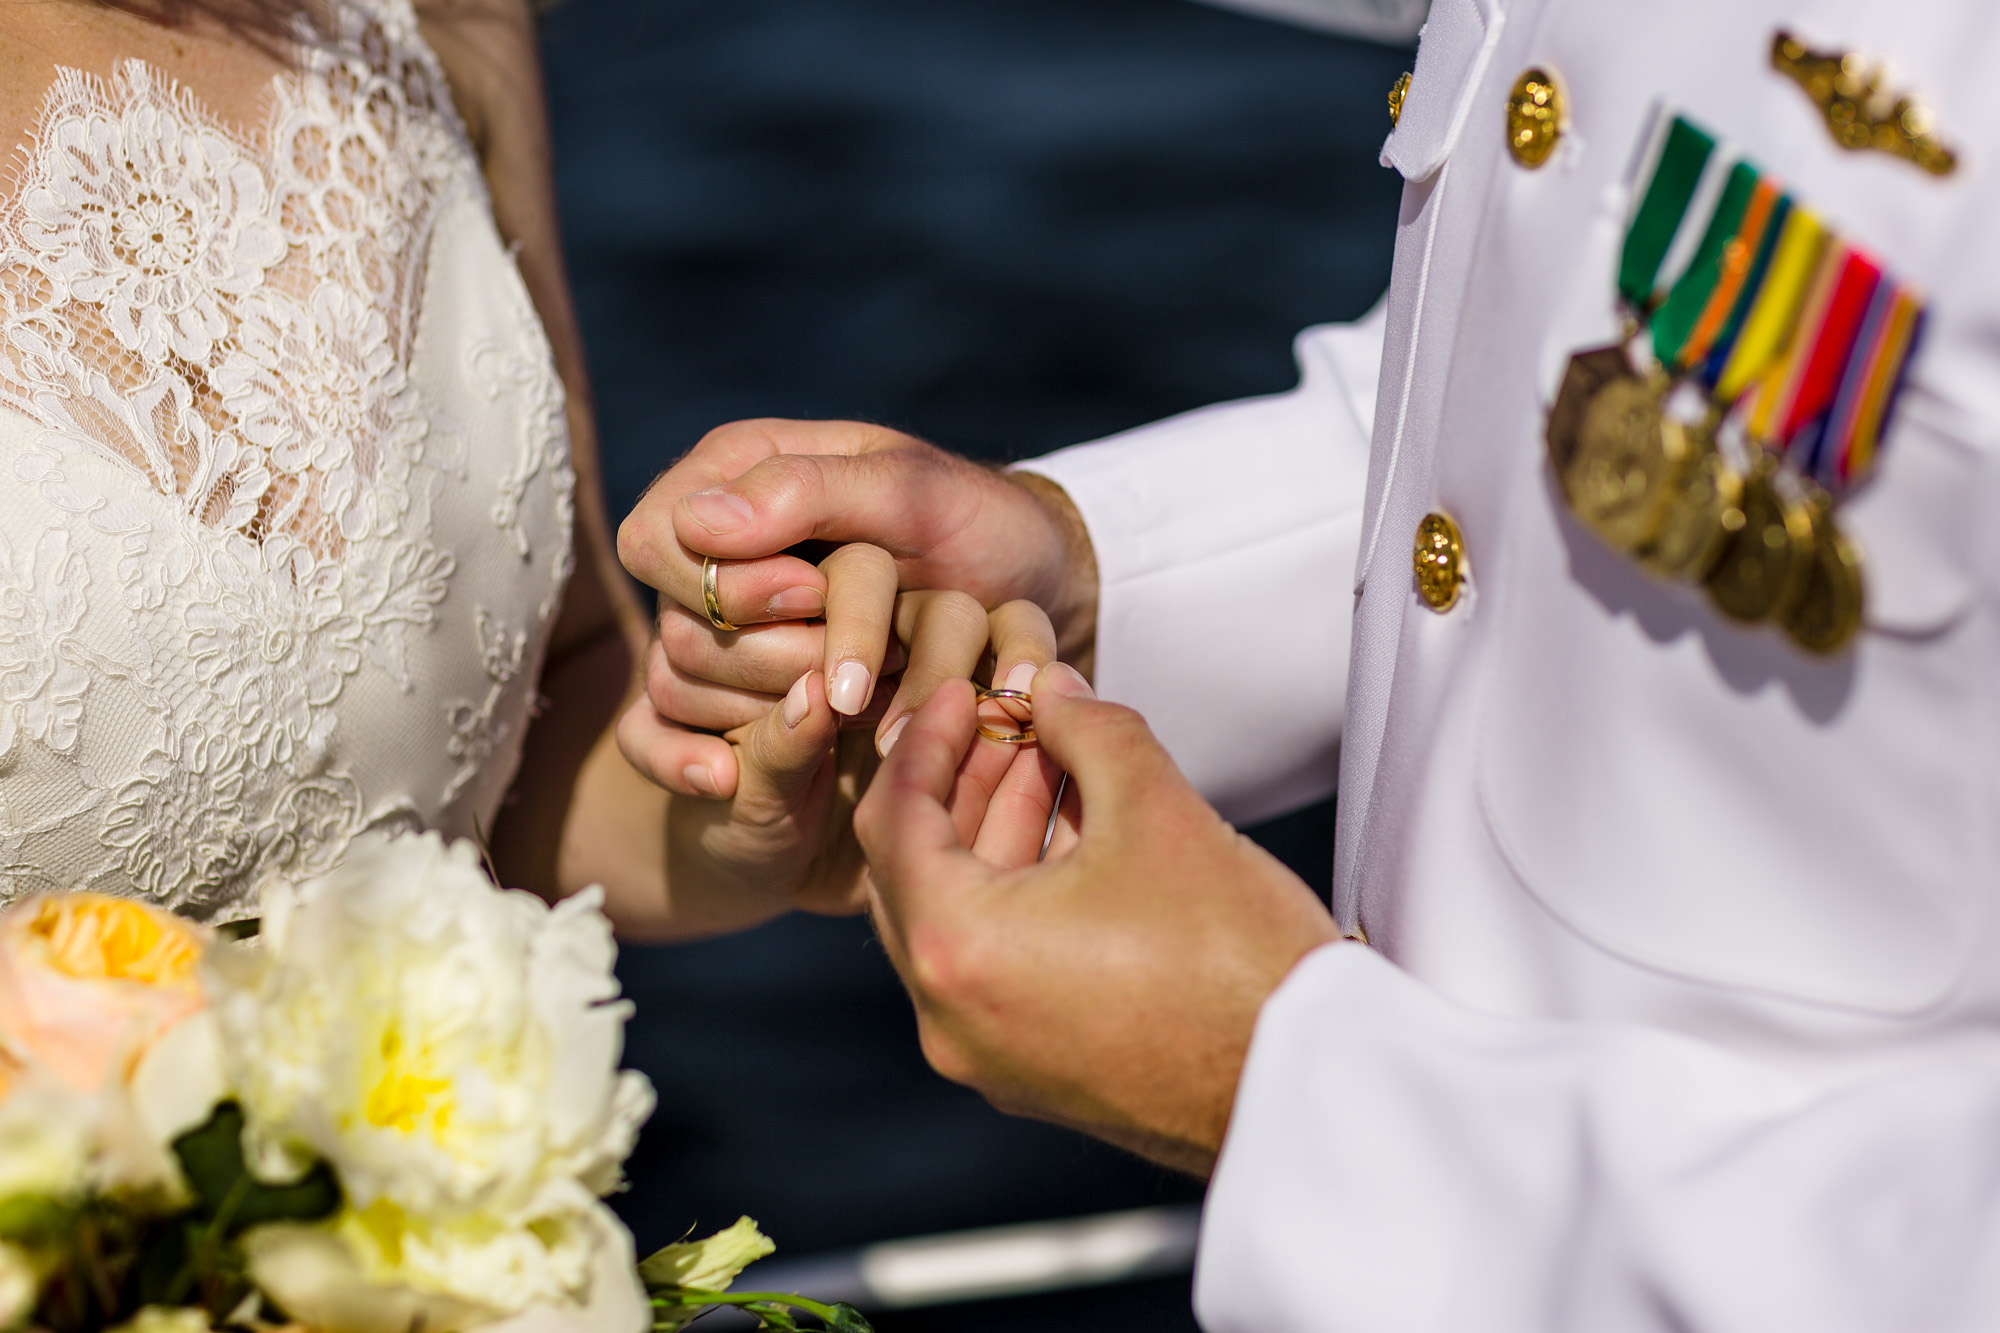 A wedding takes place on the Schooner Olad in Camden, Maine